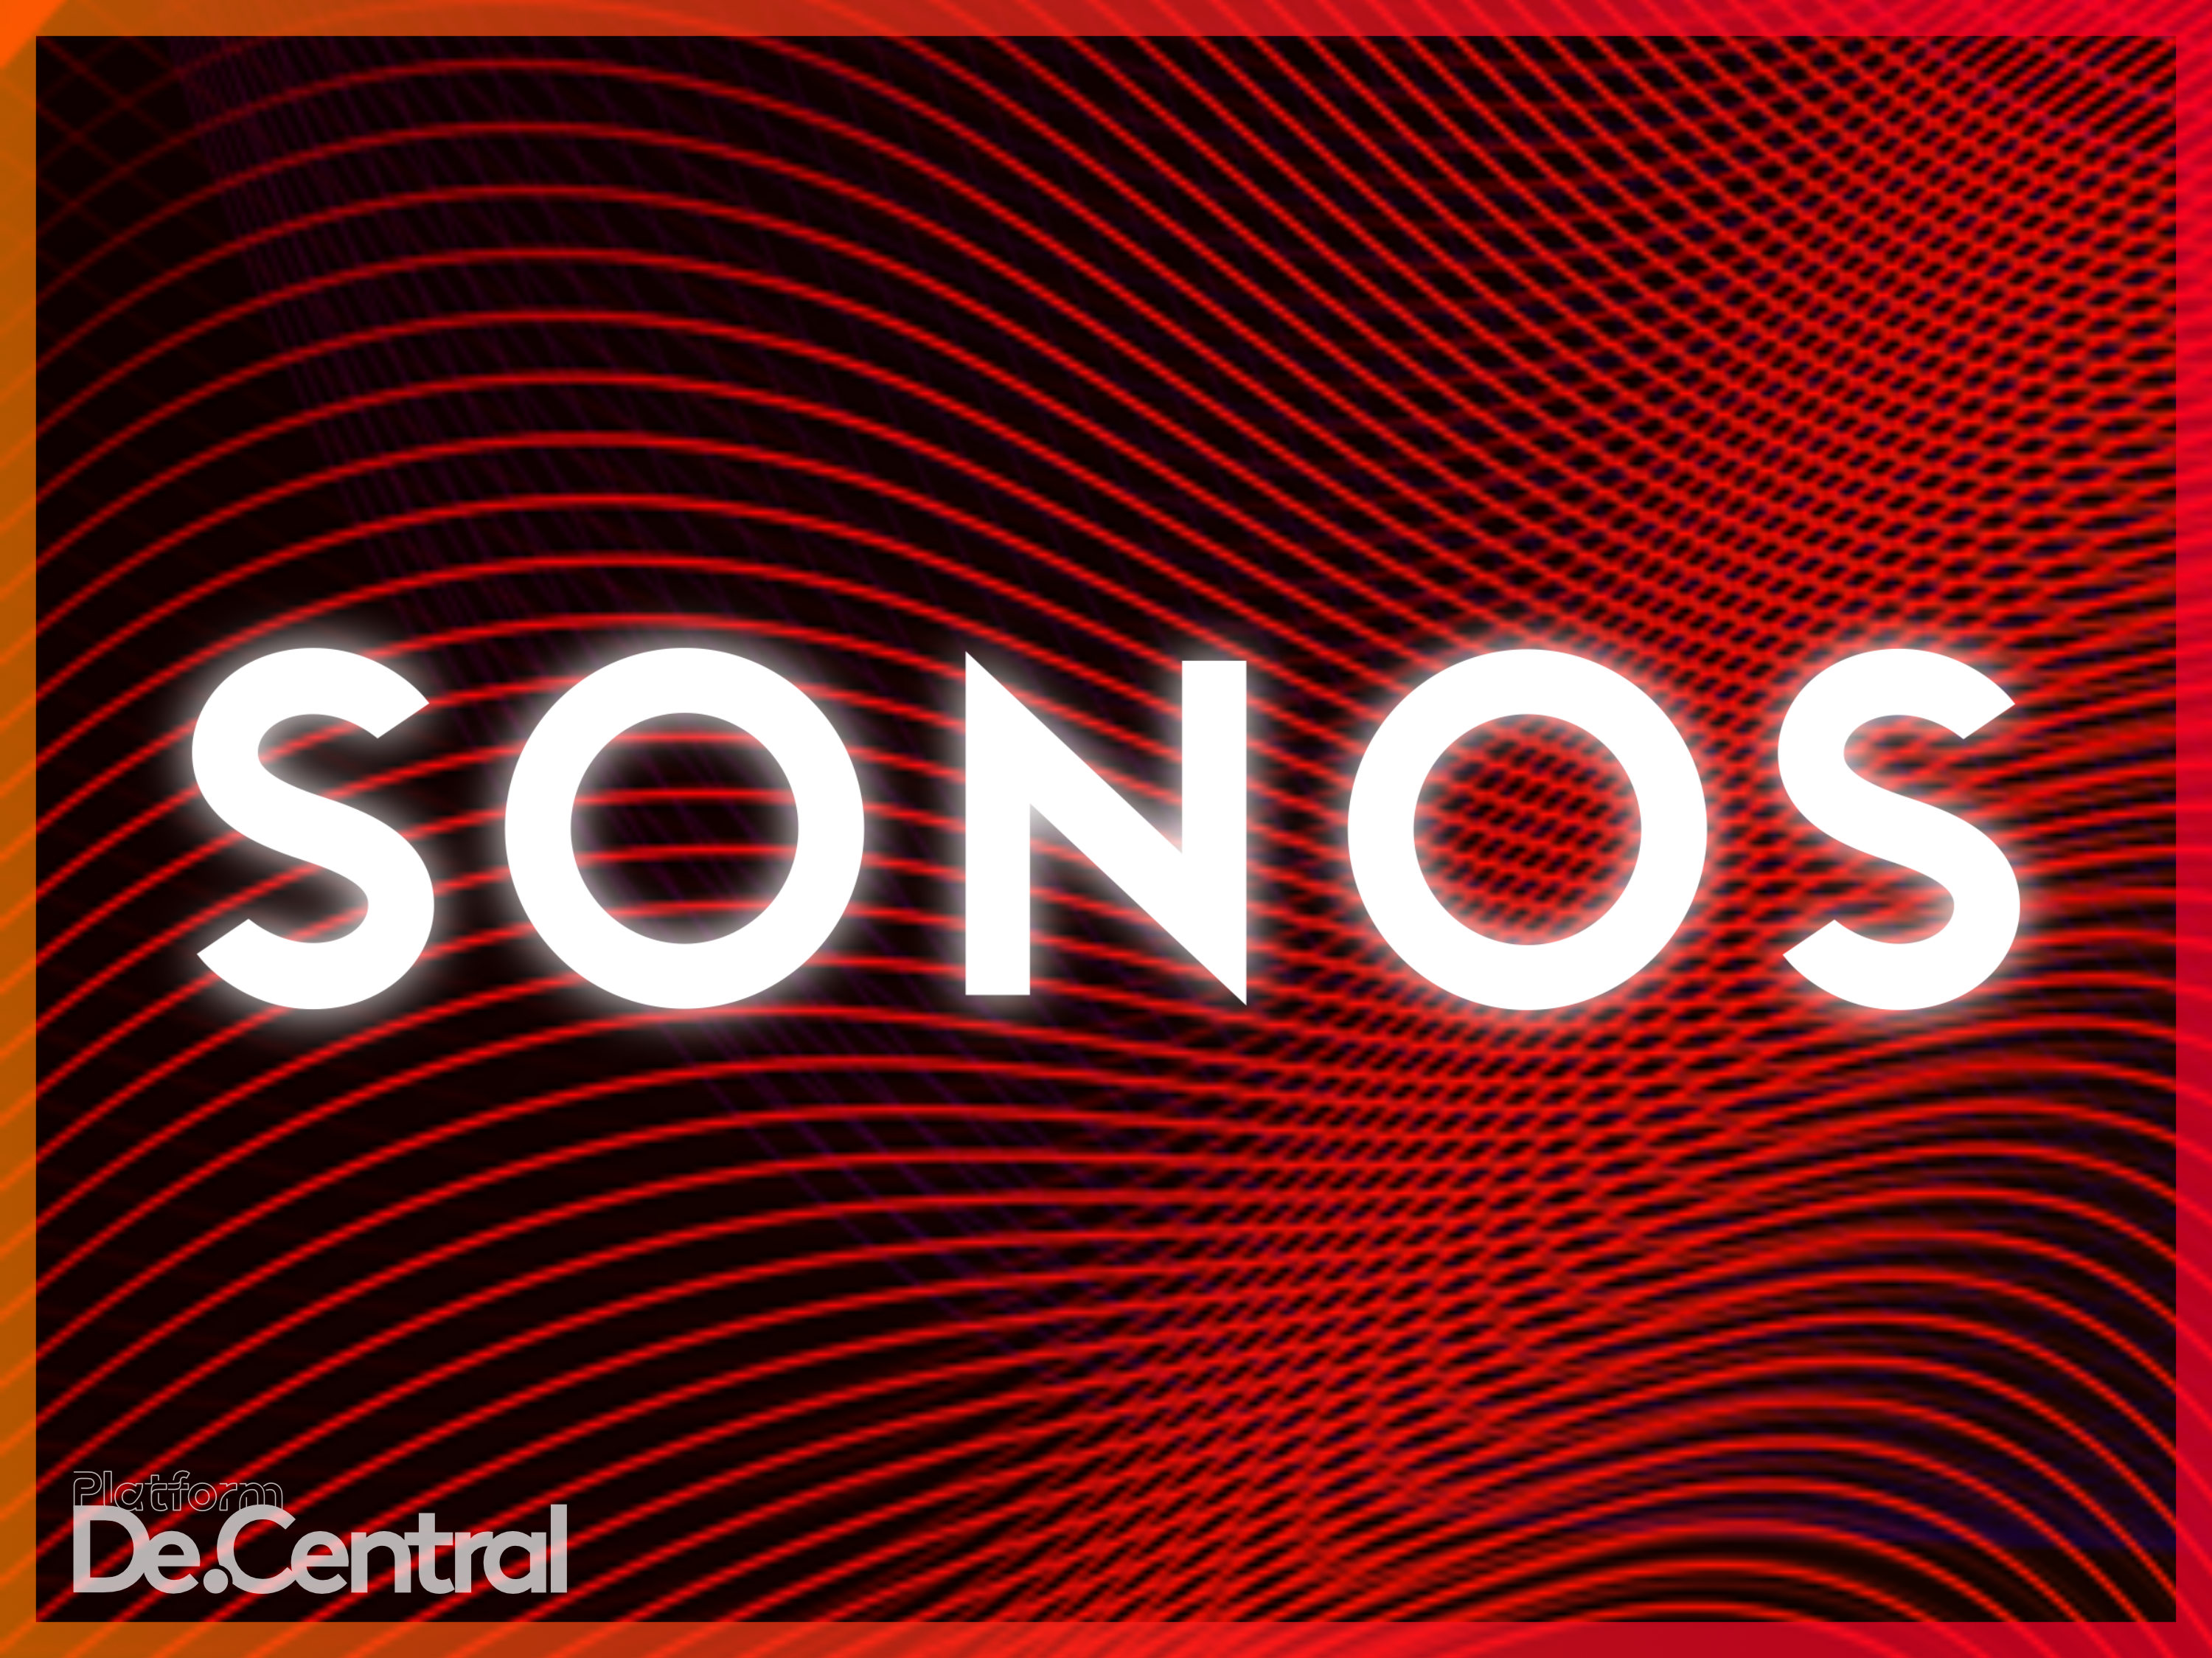 Sonos enables free audiobook listening with a library card